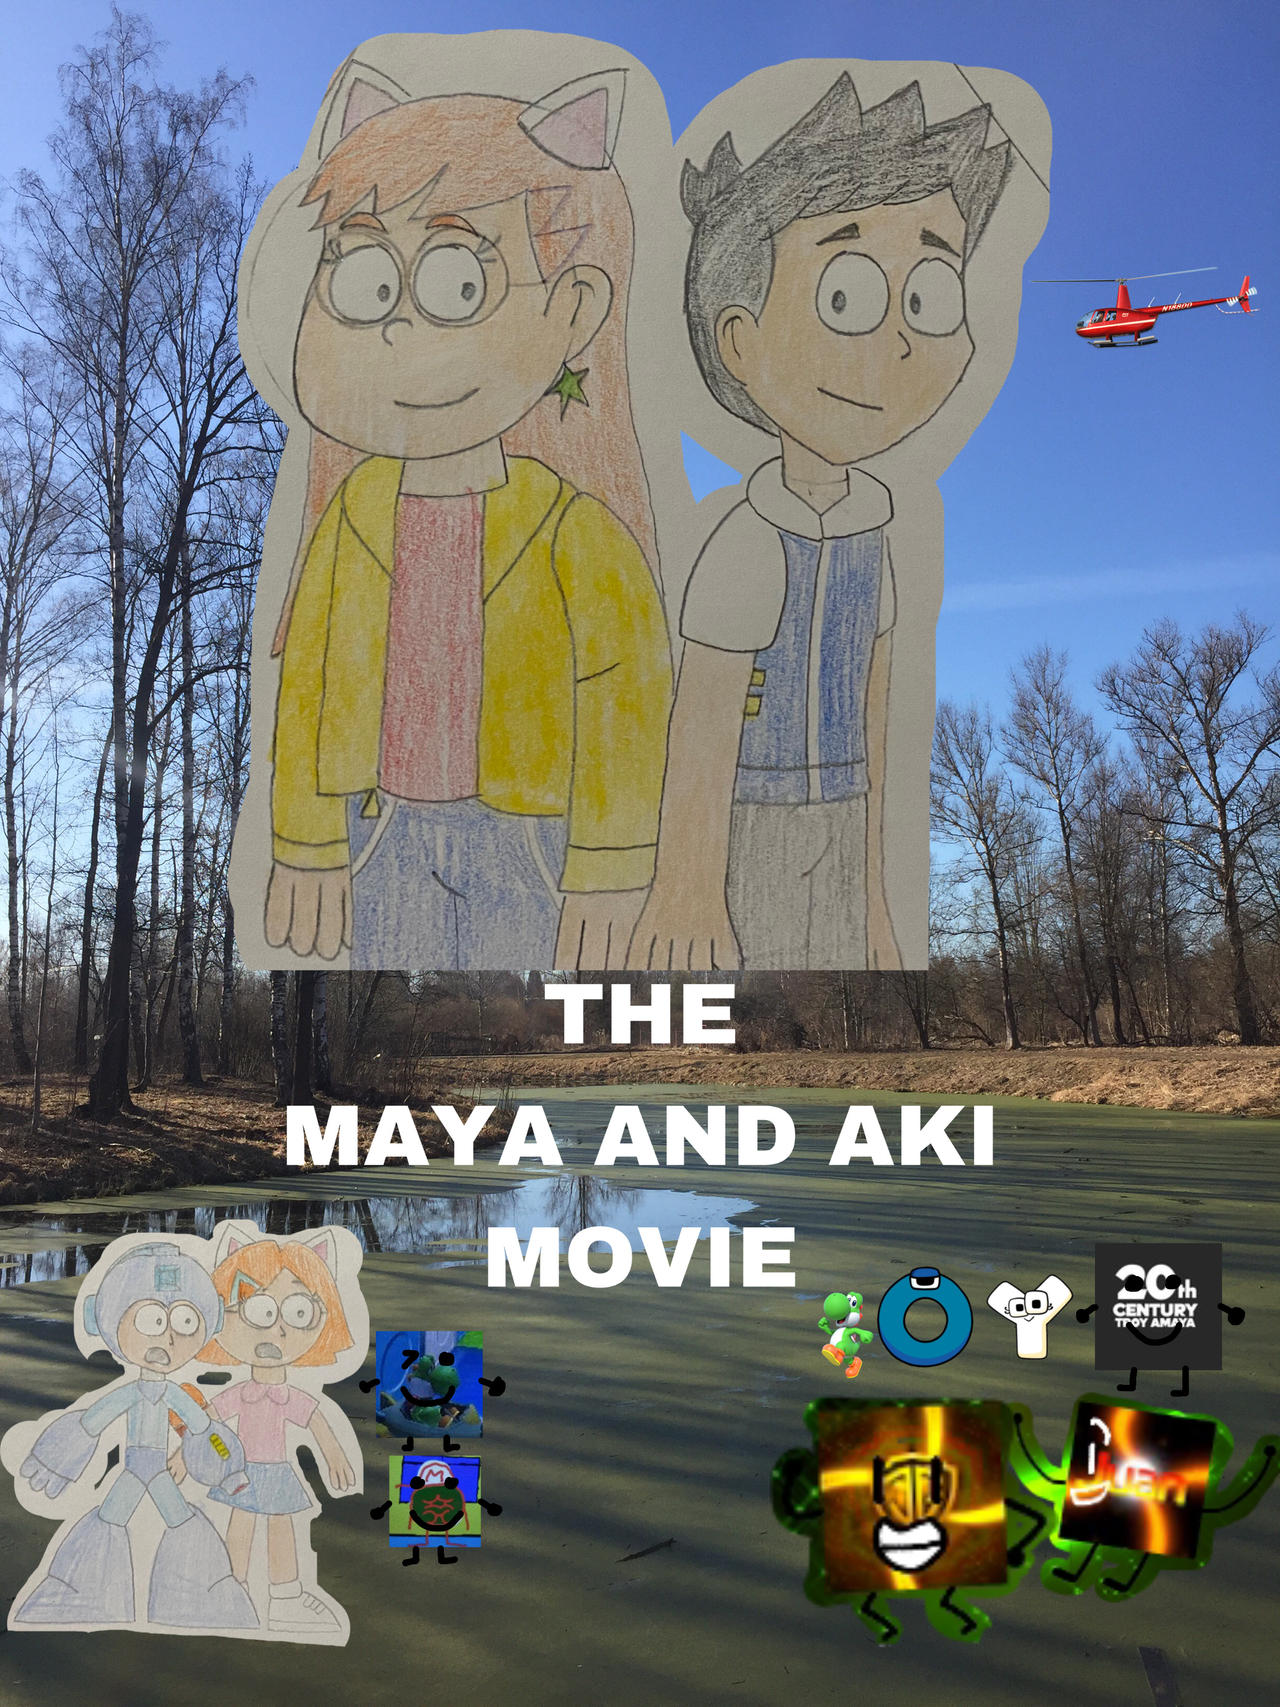 The Maya and Aki Movie (2015) Poster by 123riley123 on DeviantArt